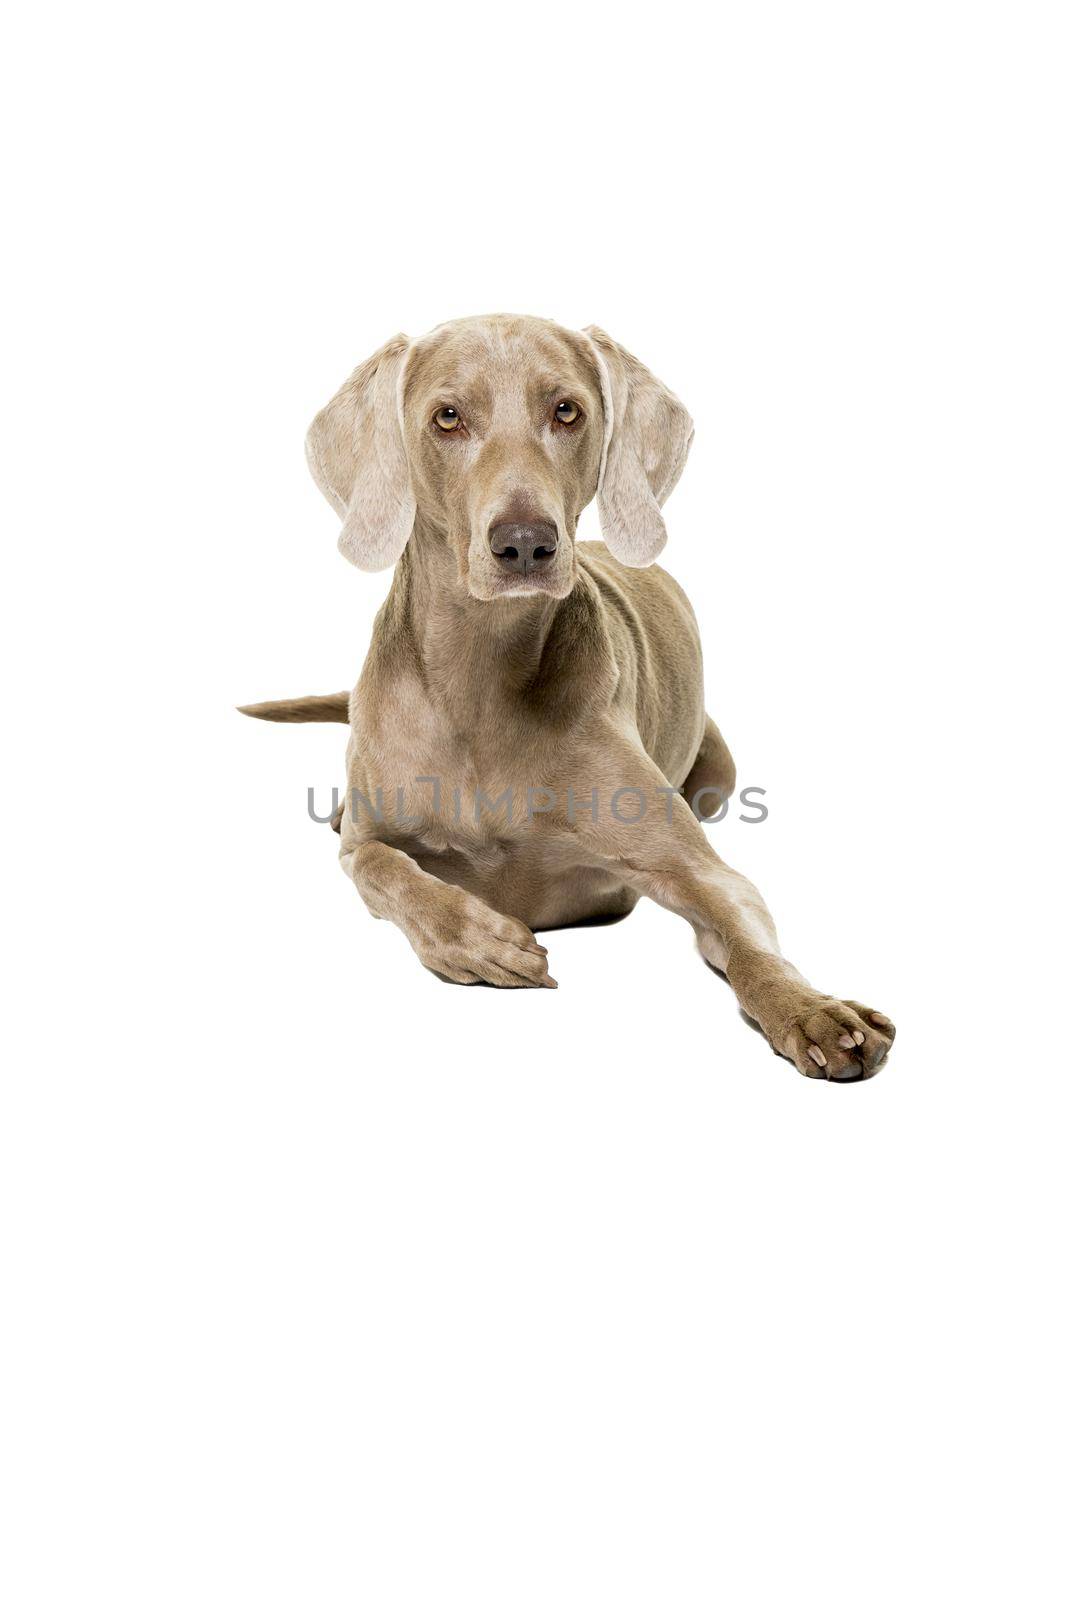 Weimaraner dog, female, lying isolated on a white background looking at the camera by LeoniekvanderVliet